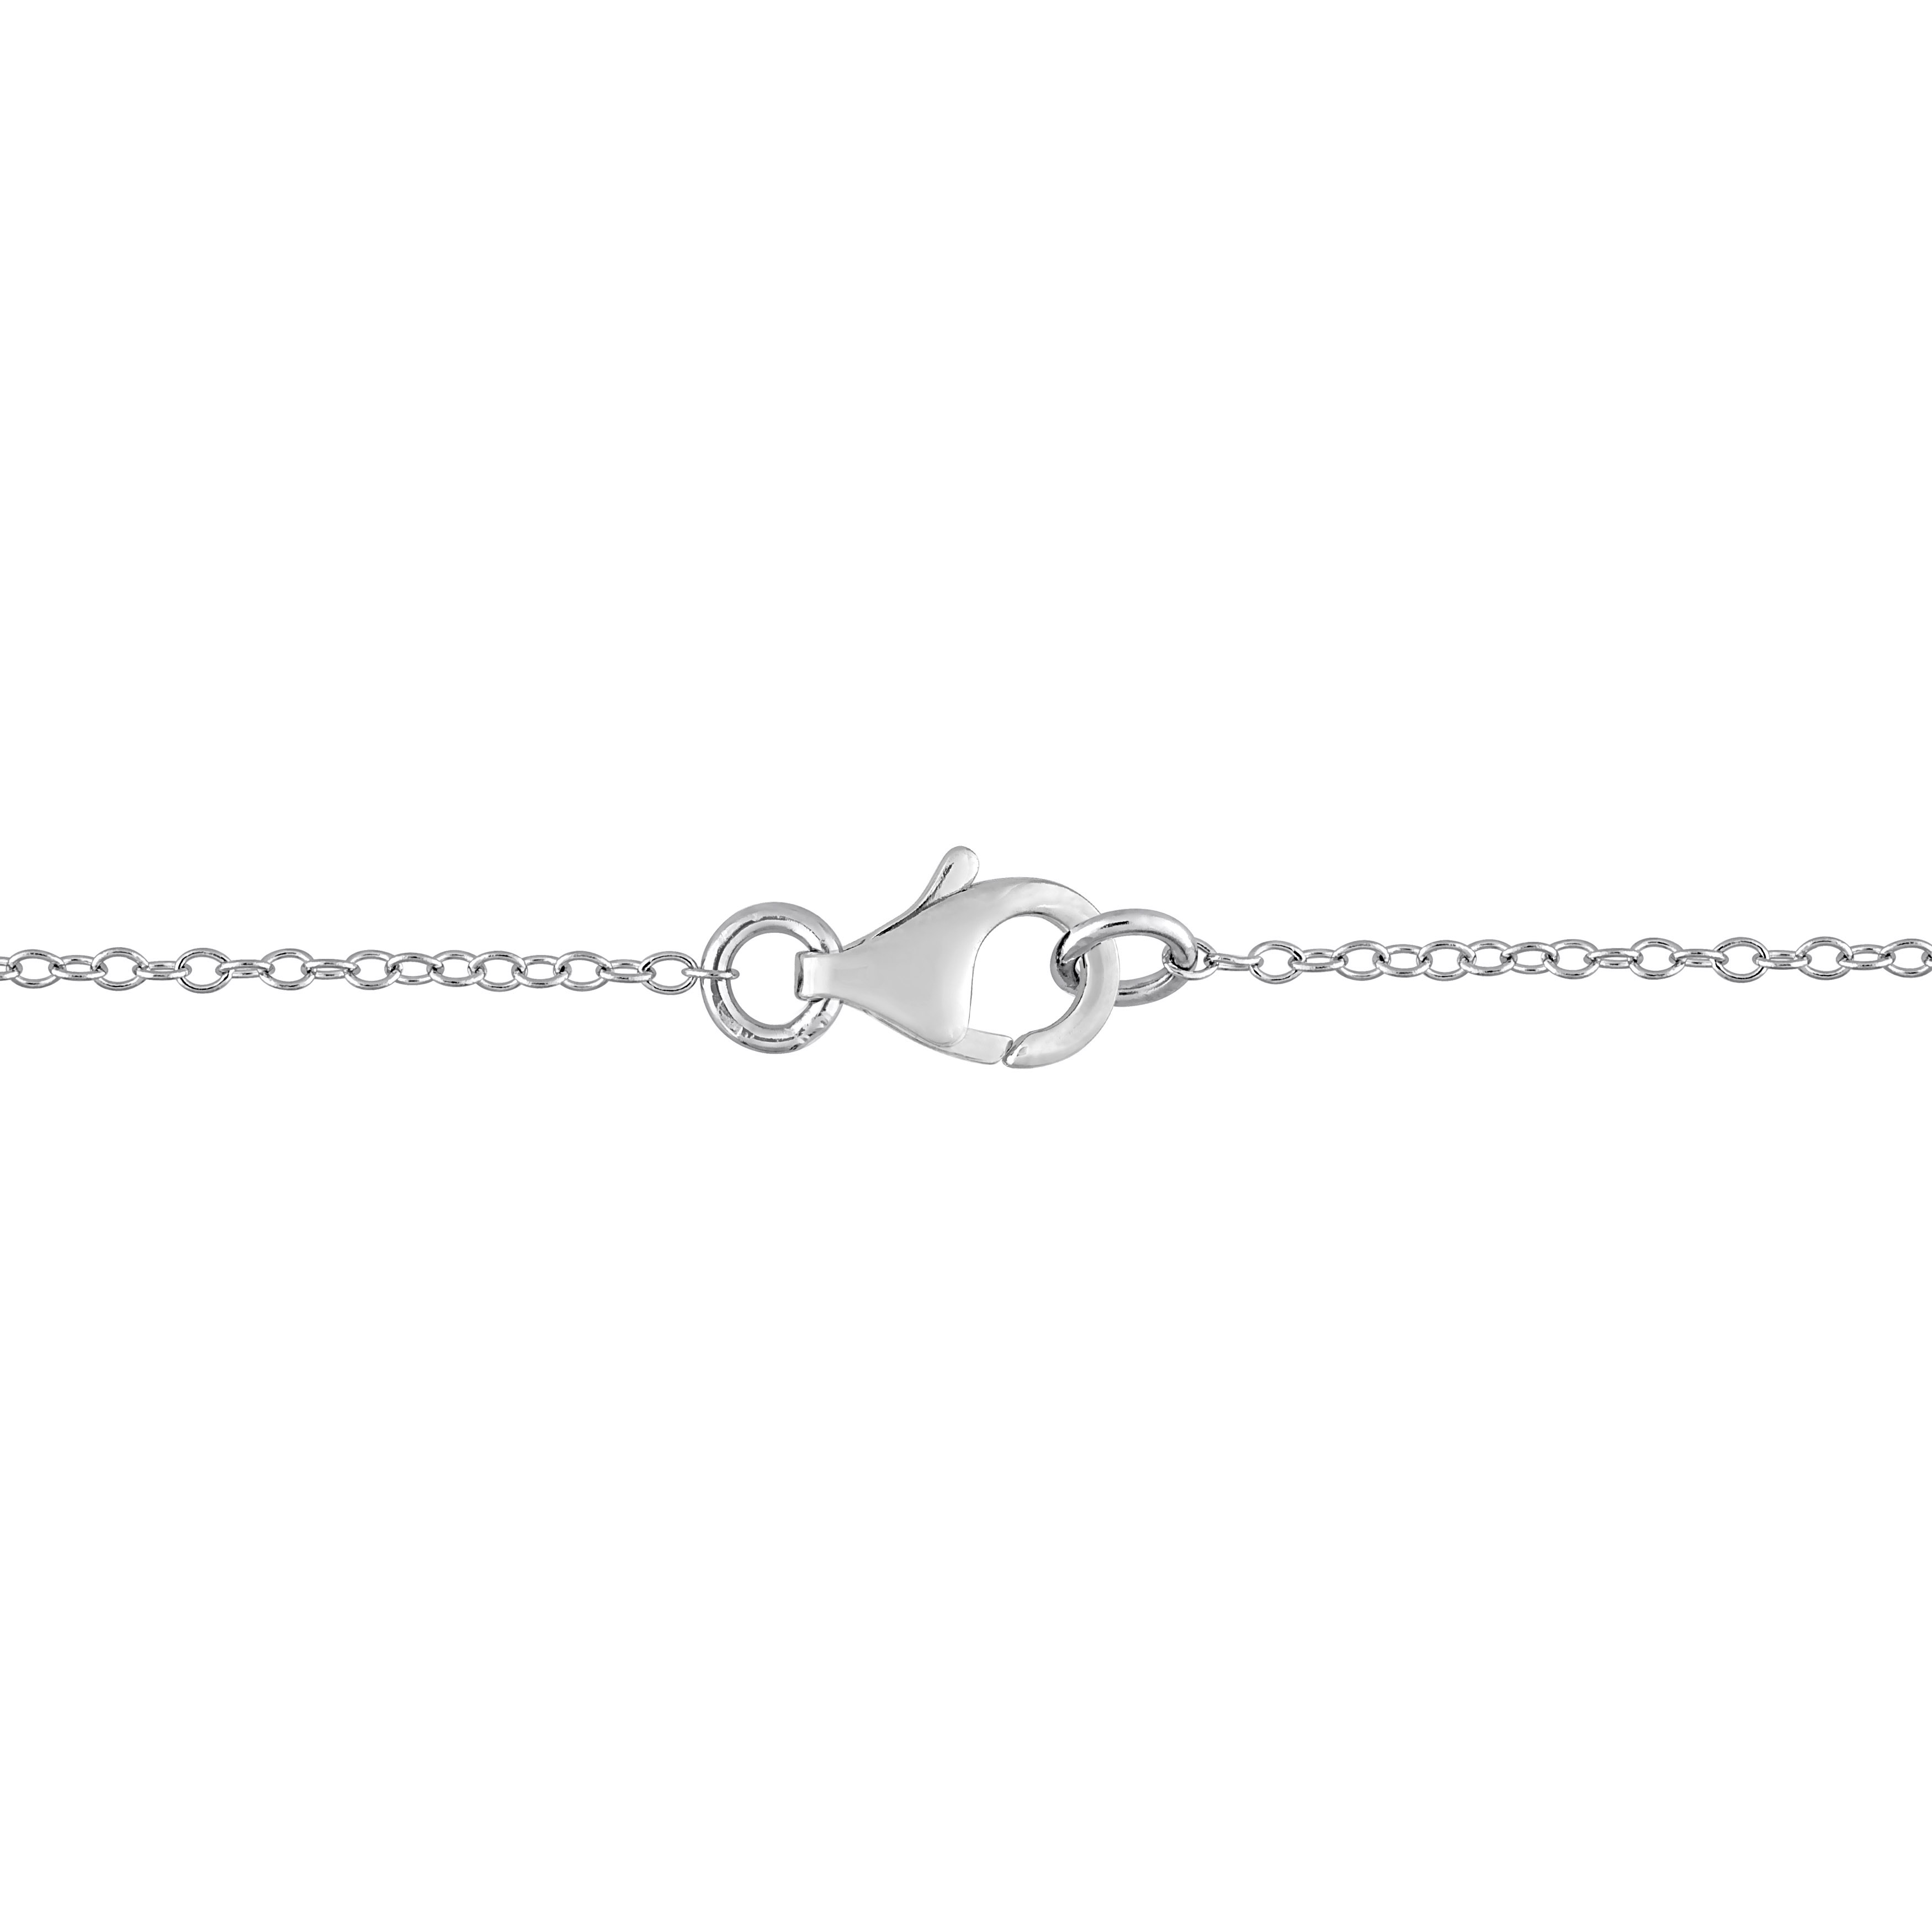 1 1/2 CT DEW Created Moissanite Halo Necklace in Sterling Silver - 17 in.